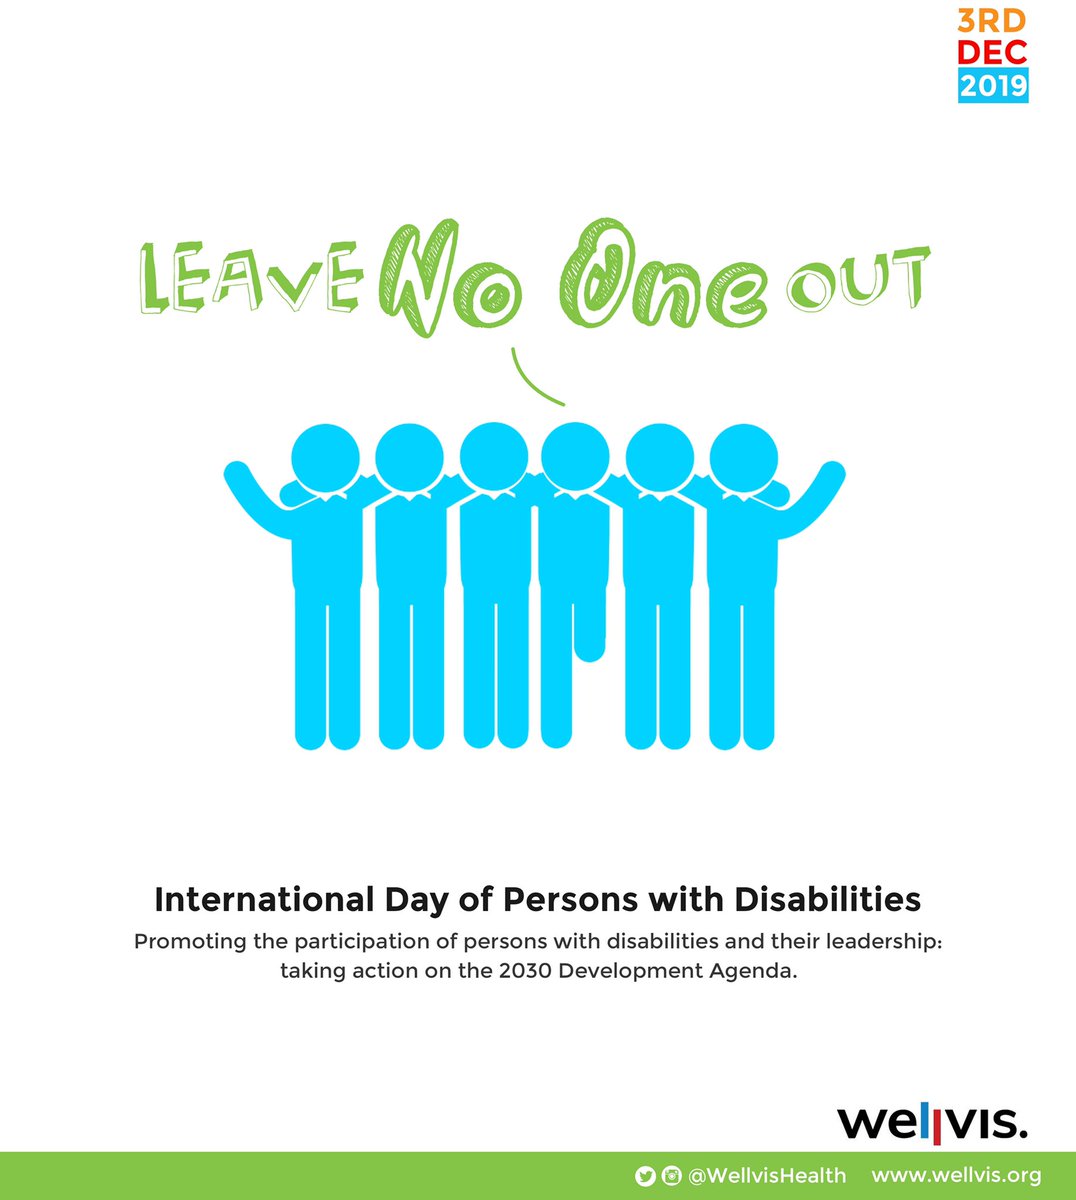 On our quest to achieving UHC and other sustainable development goals, we must continue to promote & empower persons with disabilities for equitable participation. 

#IDPWD2019 #LeaveNoOneOut #InternationalDayofPersonswithDisabilities #AssistiveTechnologies